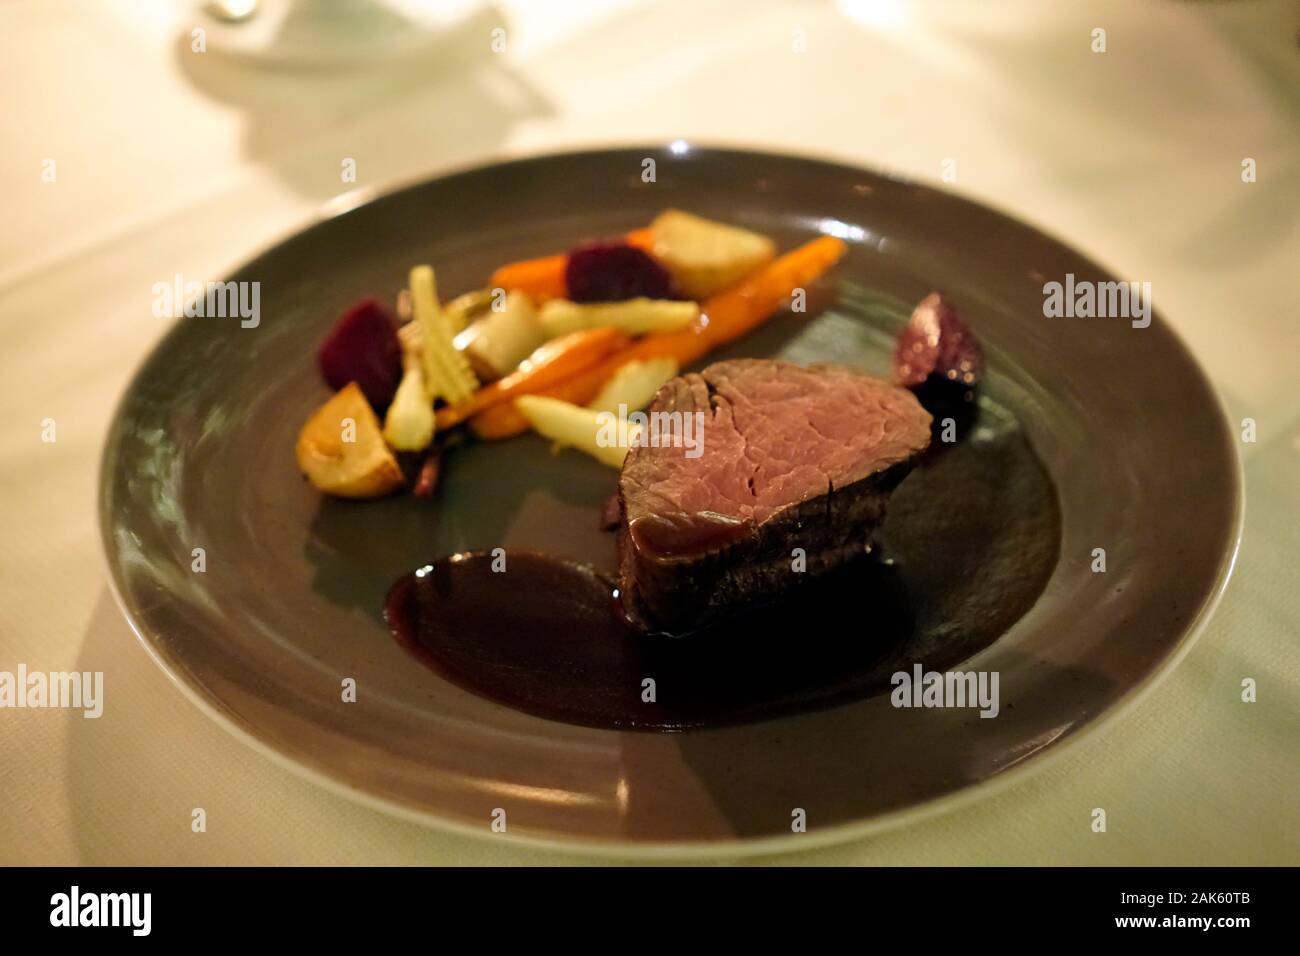 Stake - rare made with different vegetables and a dark brown sauce on the dark brown green color plate. Stock Photo